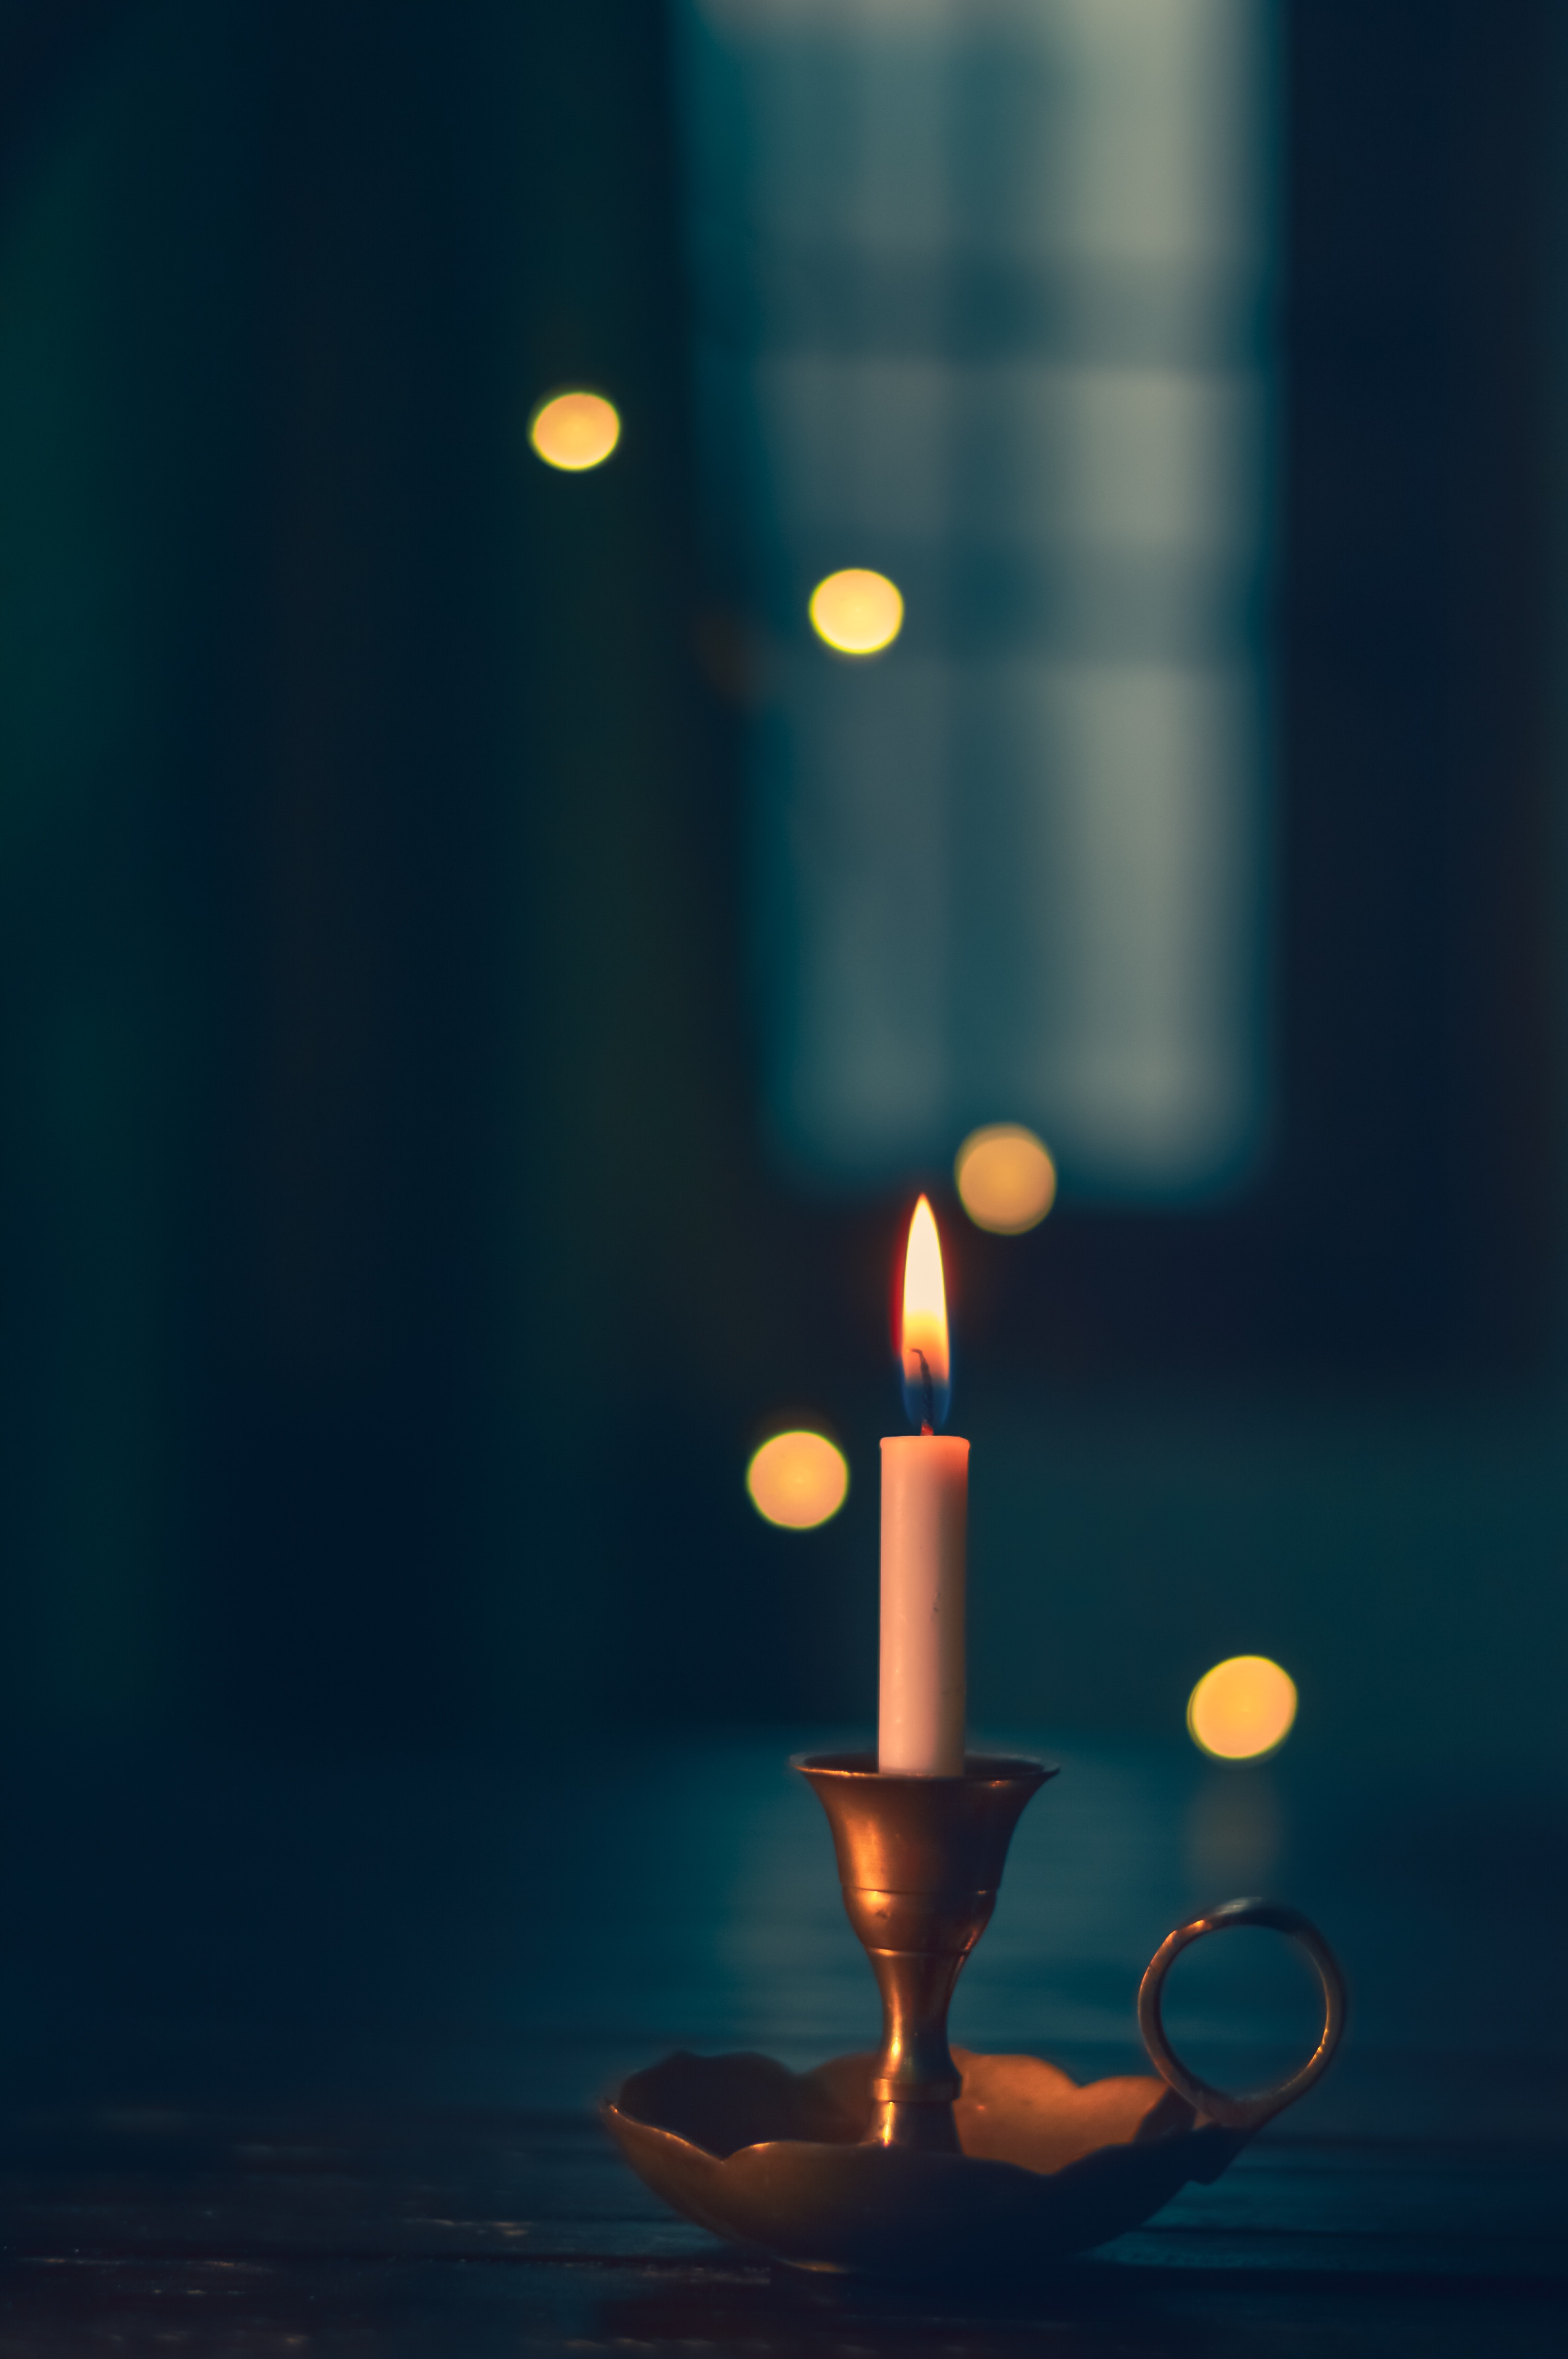 blur, miscellanea, candle, wick, wax, candlestick, fire, miscellaneous, smooth